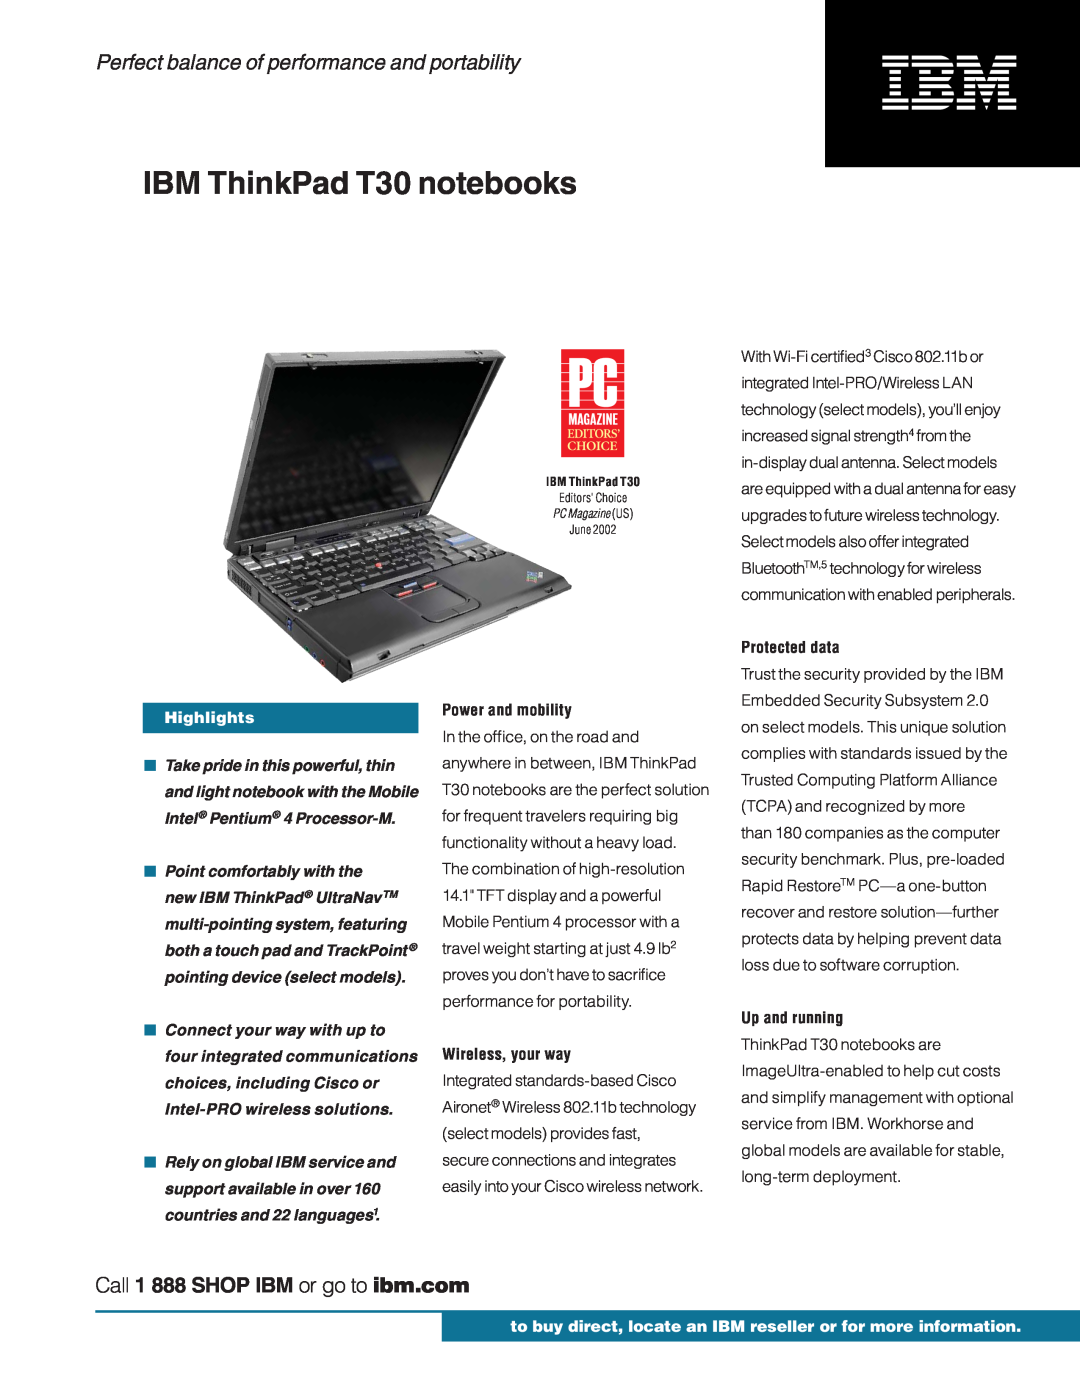 IBM manual Highlights, to buy direct, locate an IBM reseller or for more information, IBM ThinkPad T30 notebooks 